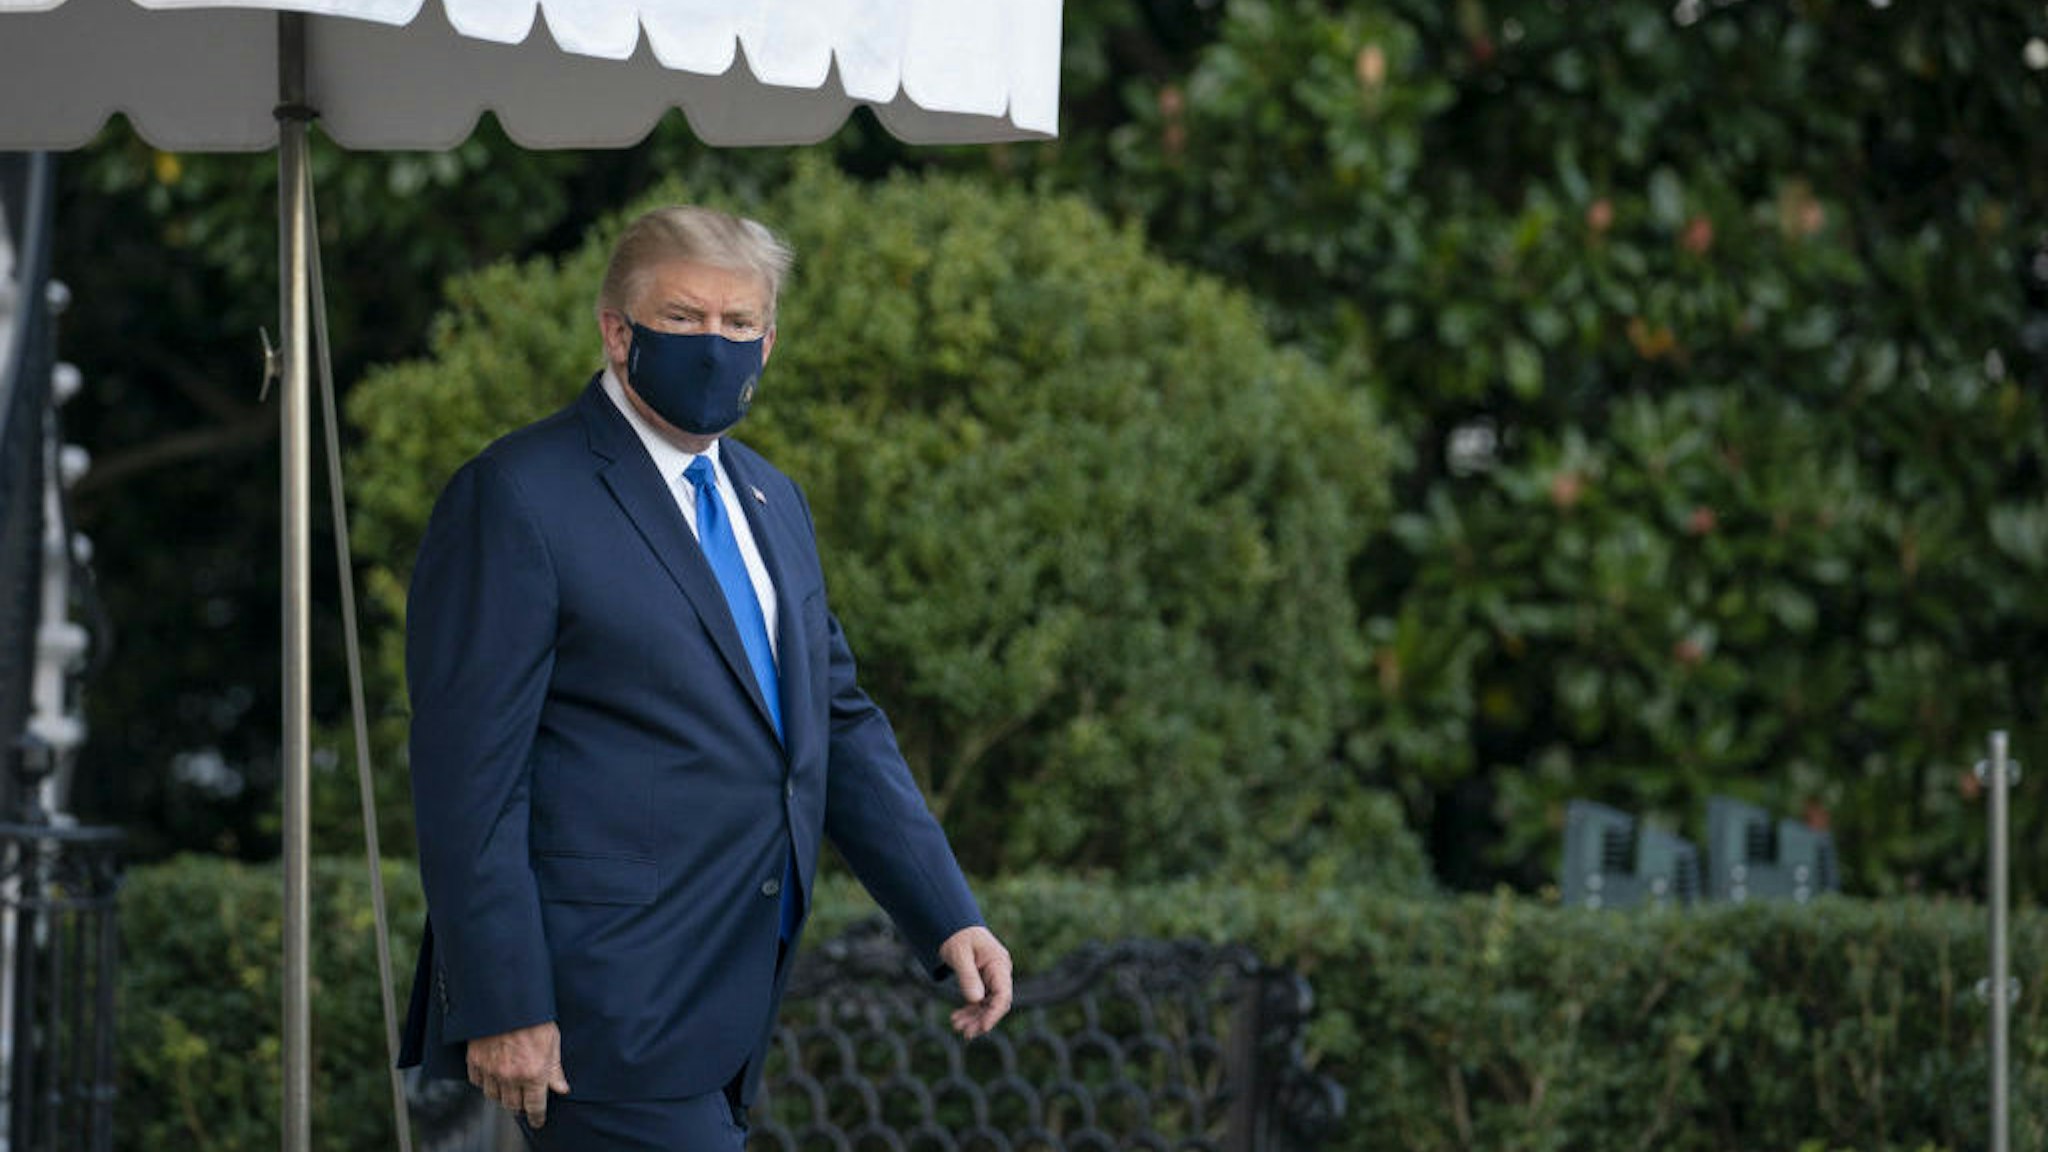 U.S. President Donald Trump wears a protective mask while walking to the South Lawn of the White House before boarding Marine One in Washington, D.C., U.S., on Friday, Oct. 2, 2020. Trump will be taken to Walter Reed National Military Medical Center to be treated for Covid-19, the White House said. Photographer: Sarah Silbiger/Bloomberg